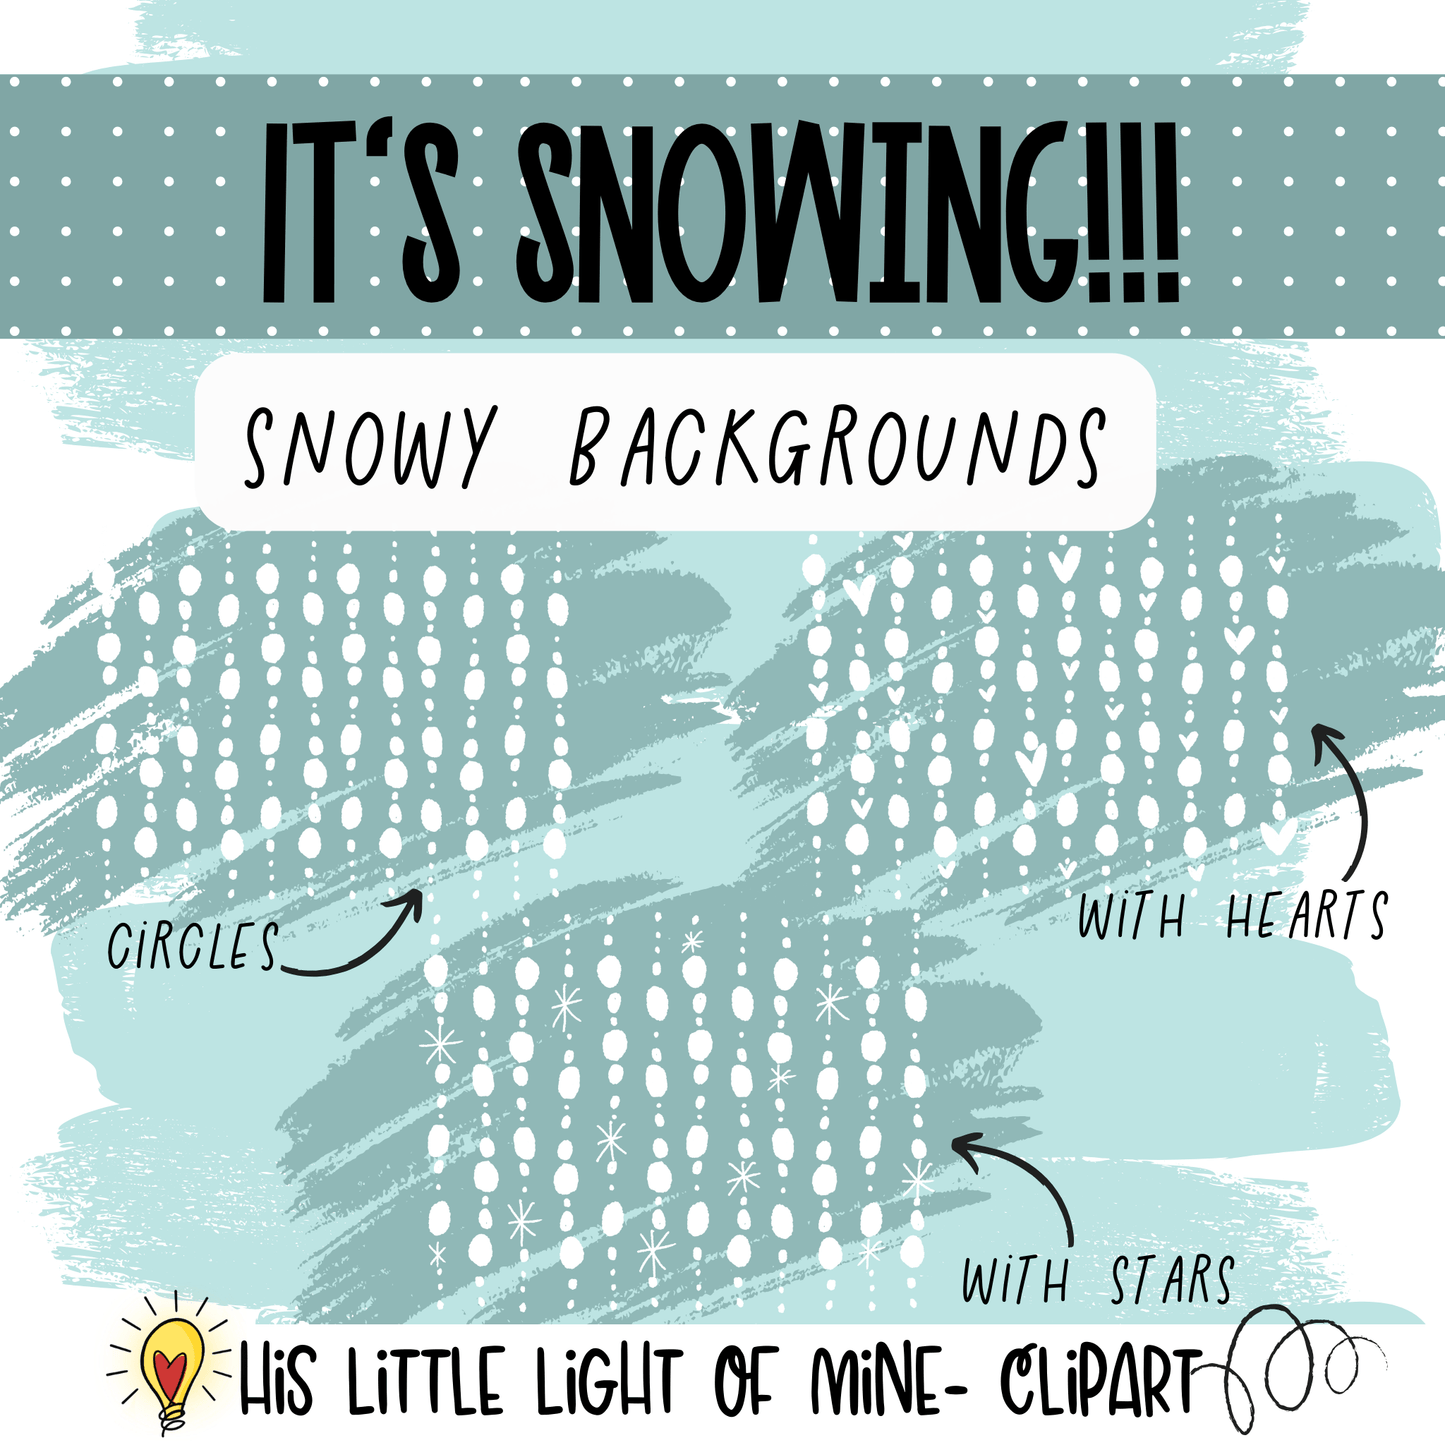 It’s Snowing clip art pack showing snowy snowing backgrounds with hearts, stars and circles